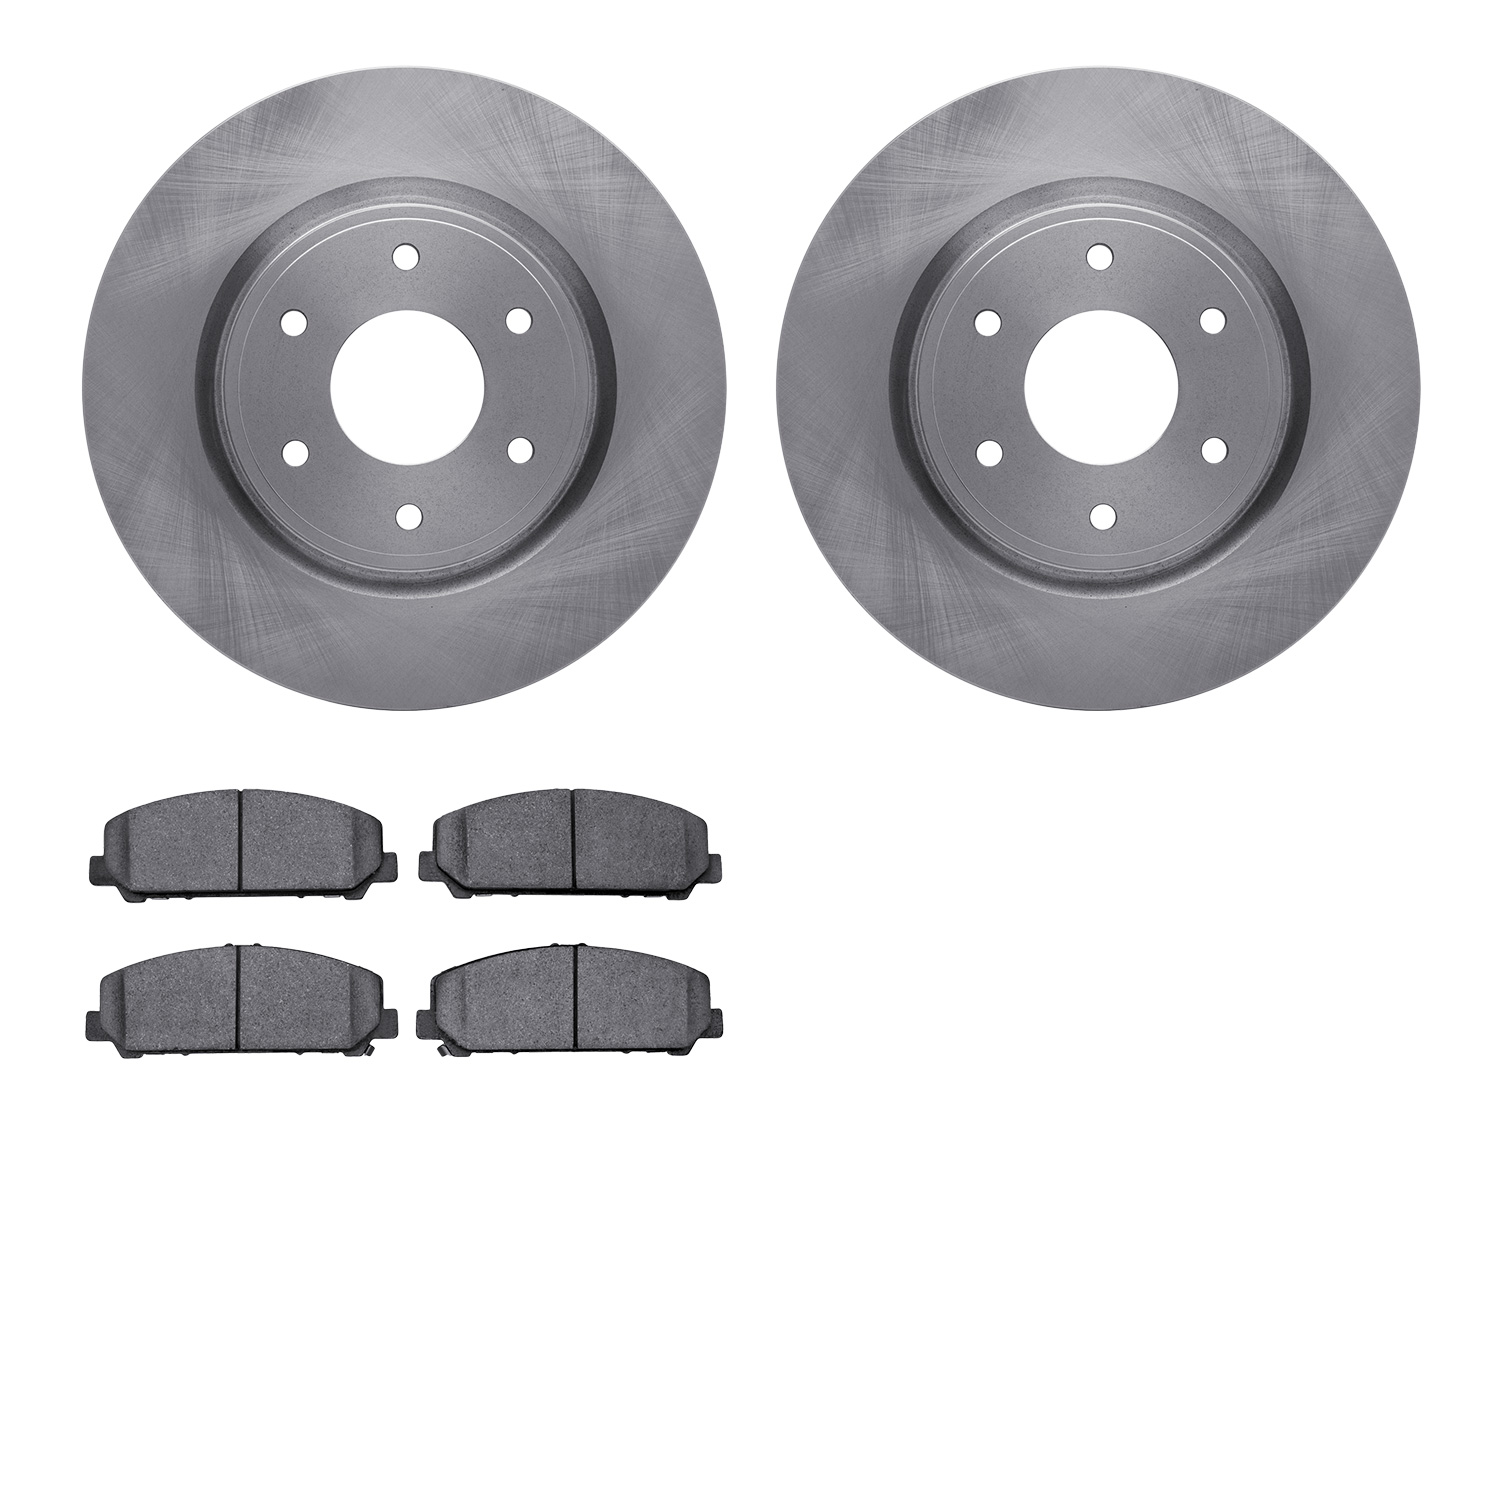 6402-67010 Brake Rotors with Ultimate-Duty Brake Pads, 2005-2007 Infiniti/Nissan, Position: Front